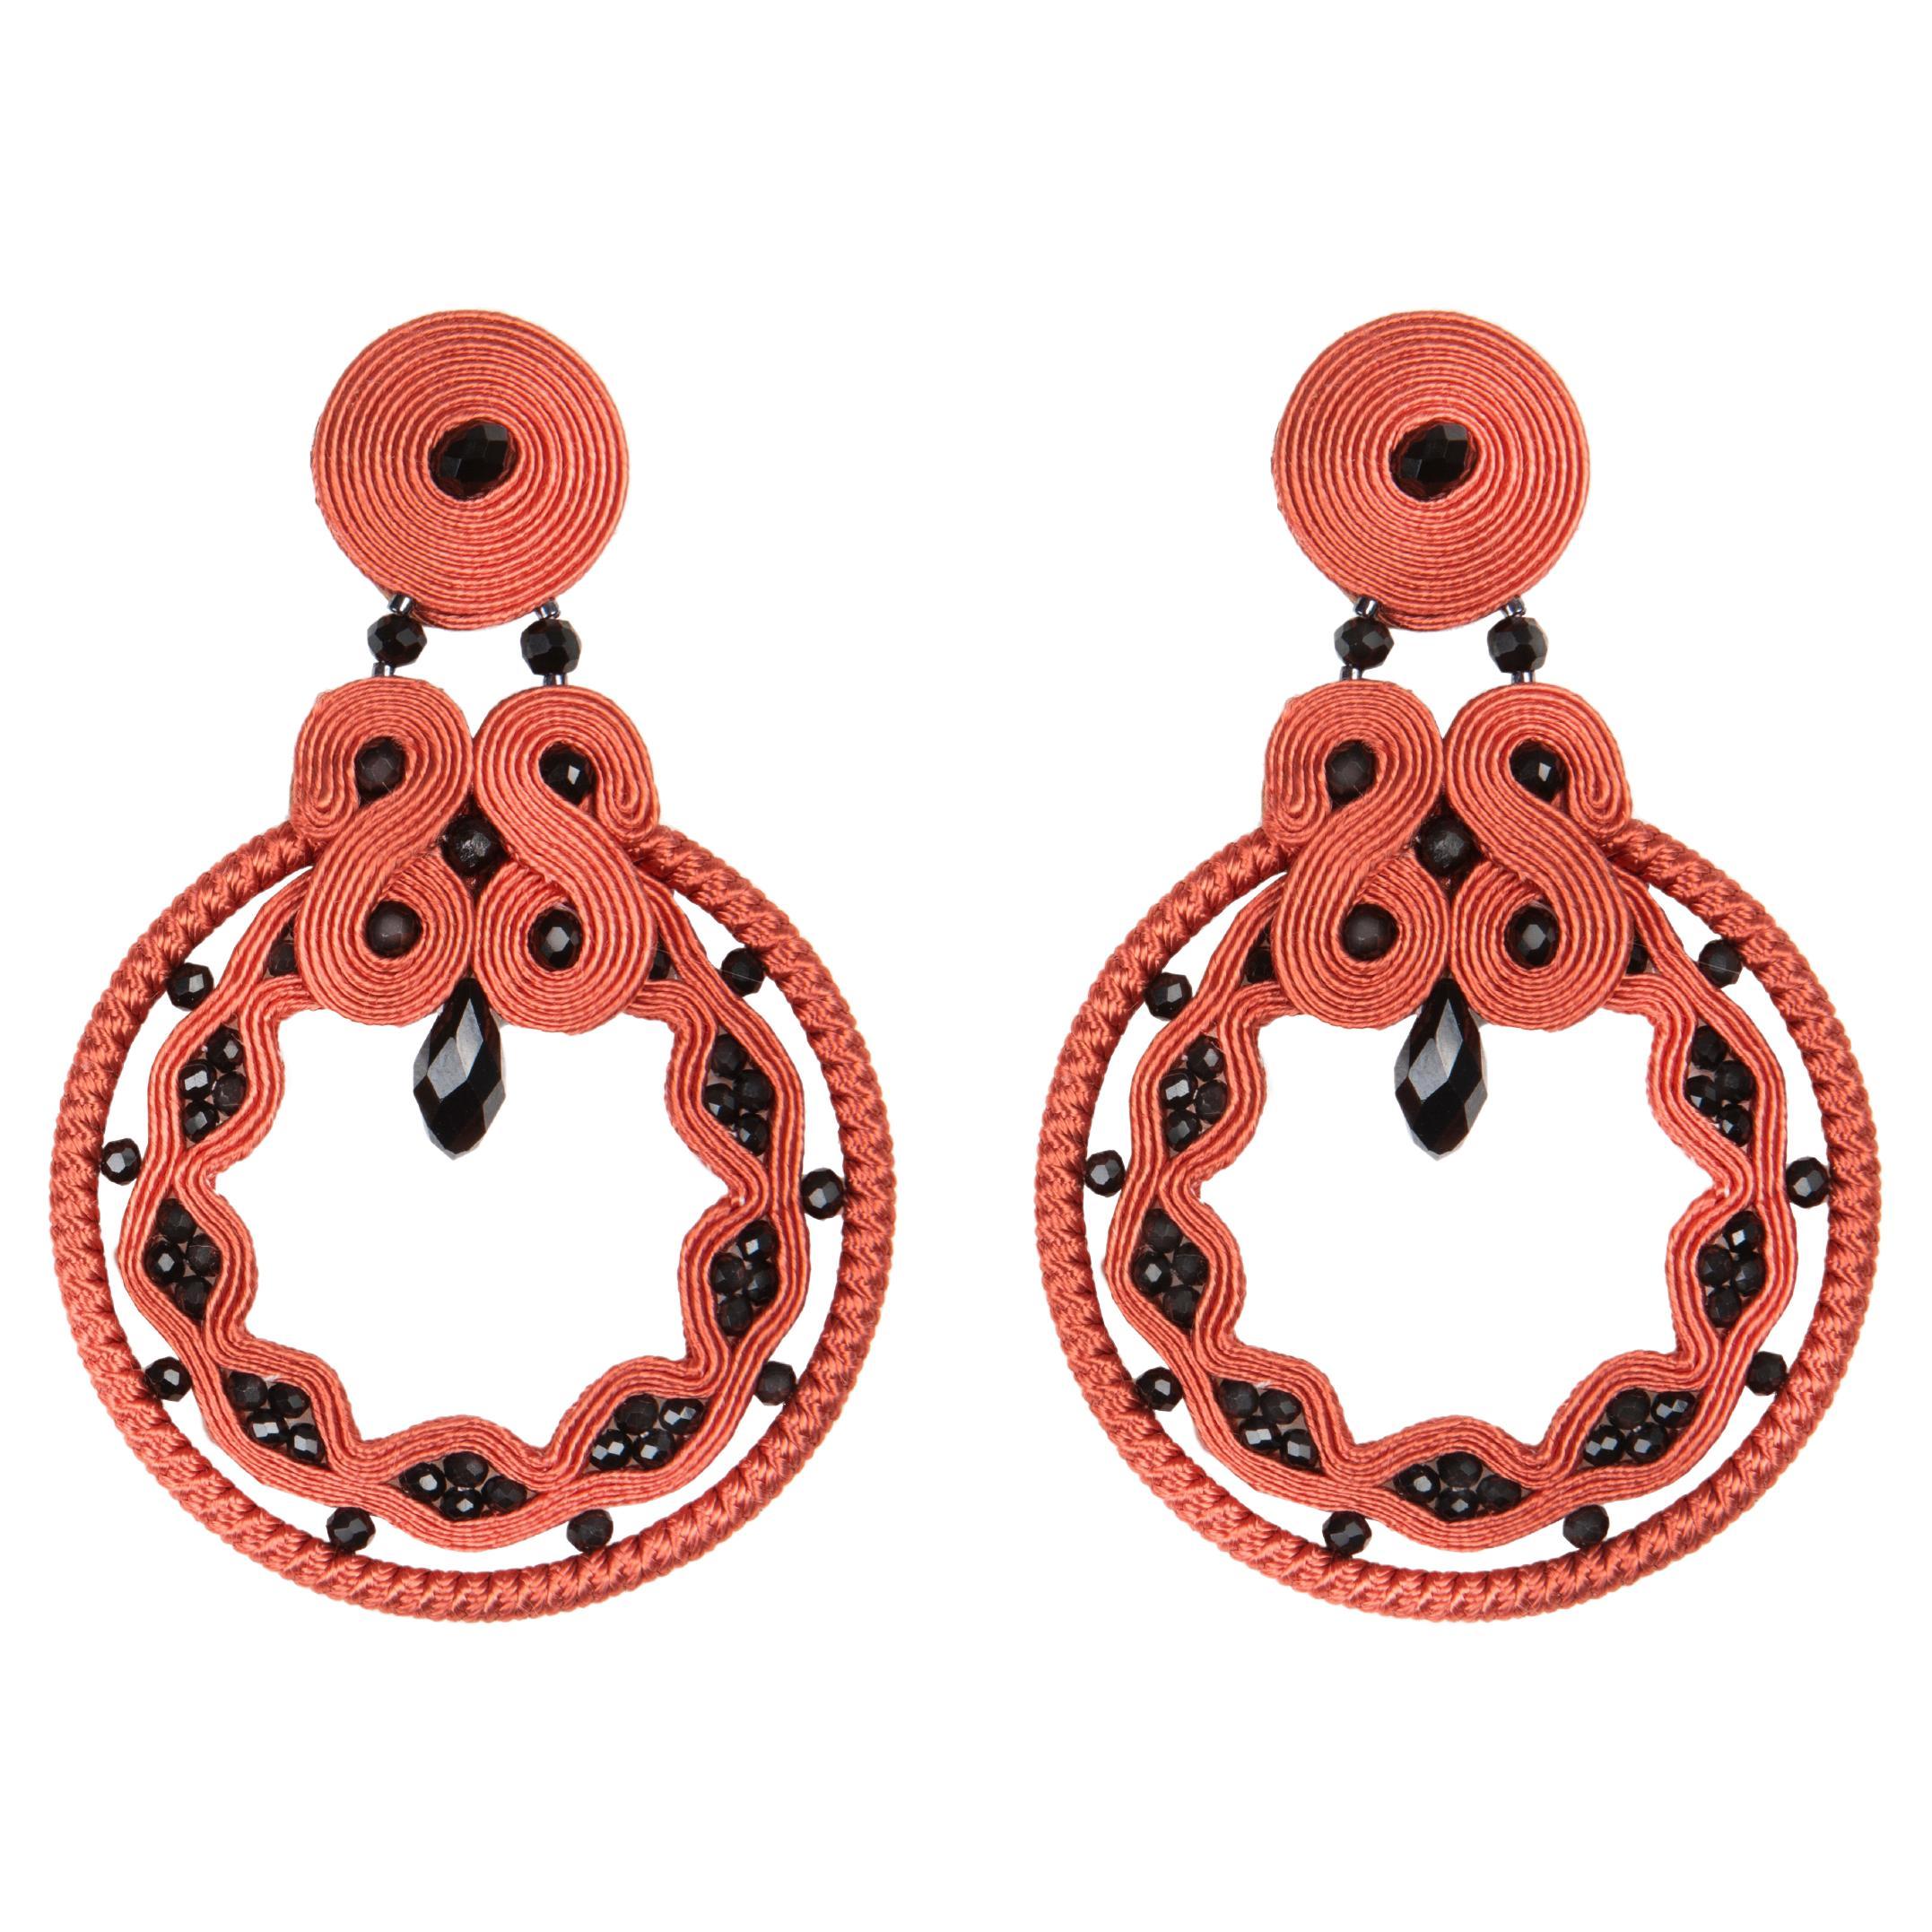  Miabril Coral & Jet Soutache Earrings with Silk Rayon, Beads & Silver Closure For Sale